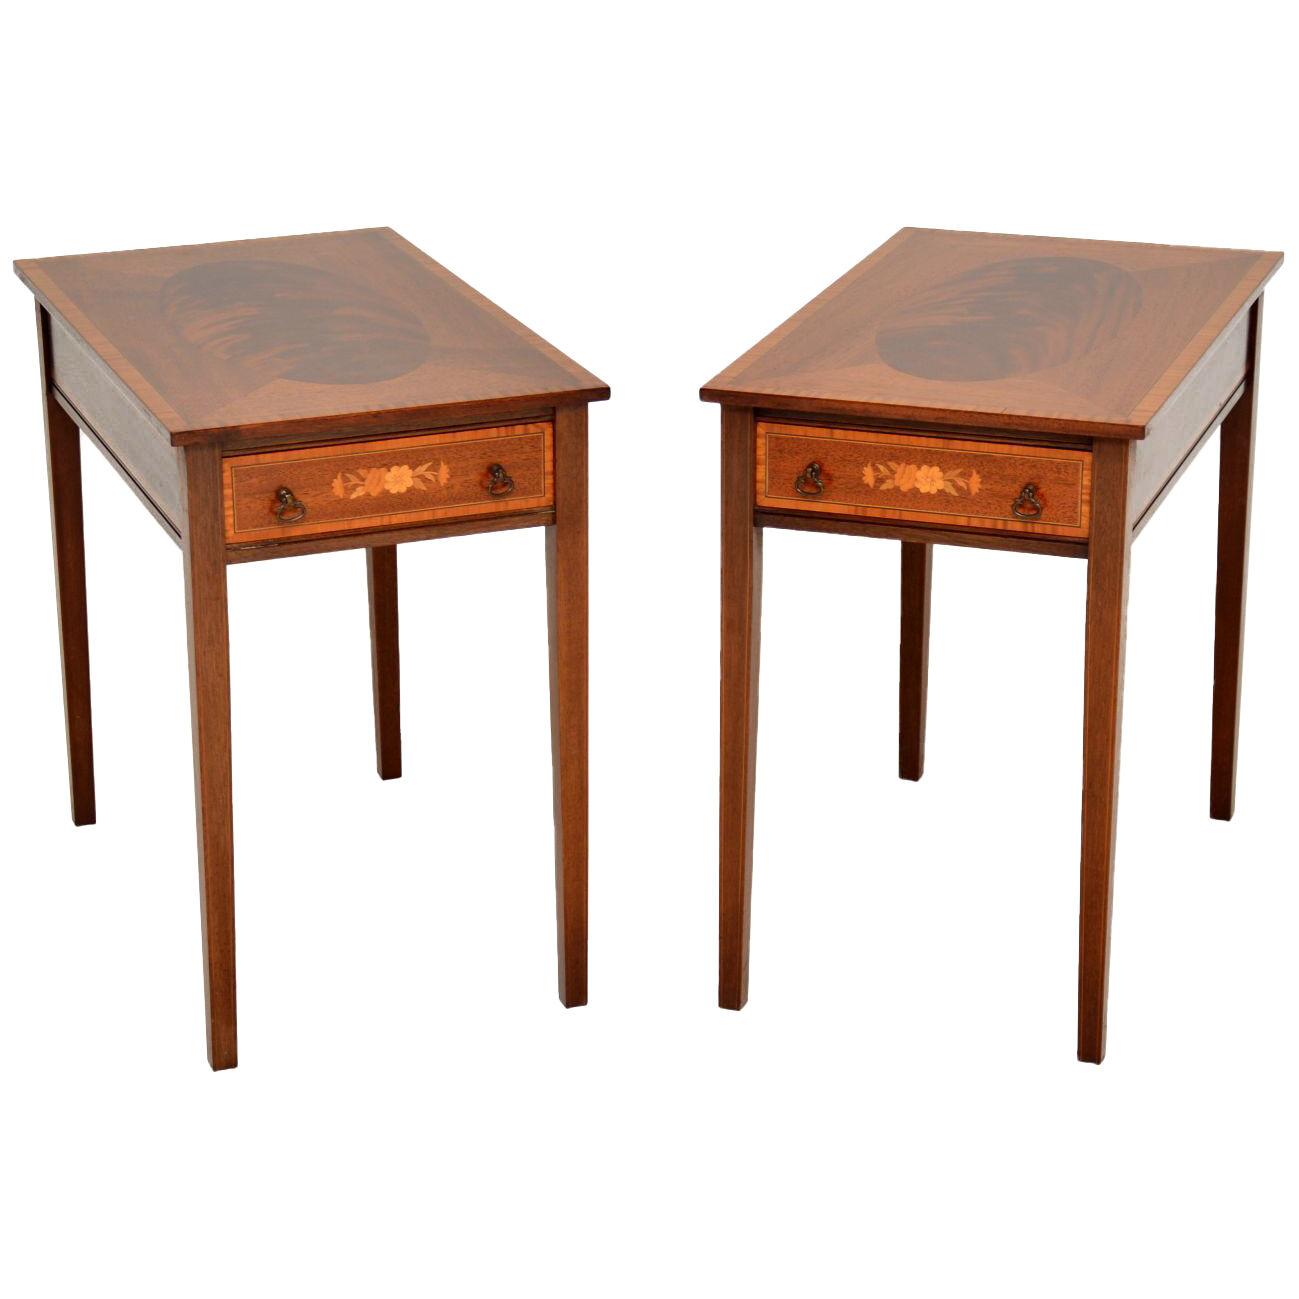 Pair of Antique Sheraton Revival Inlaid Mahogany Side Tables